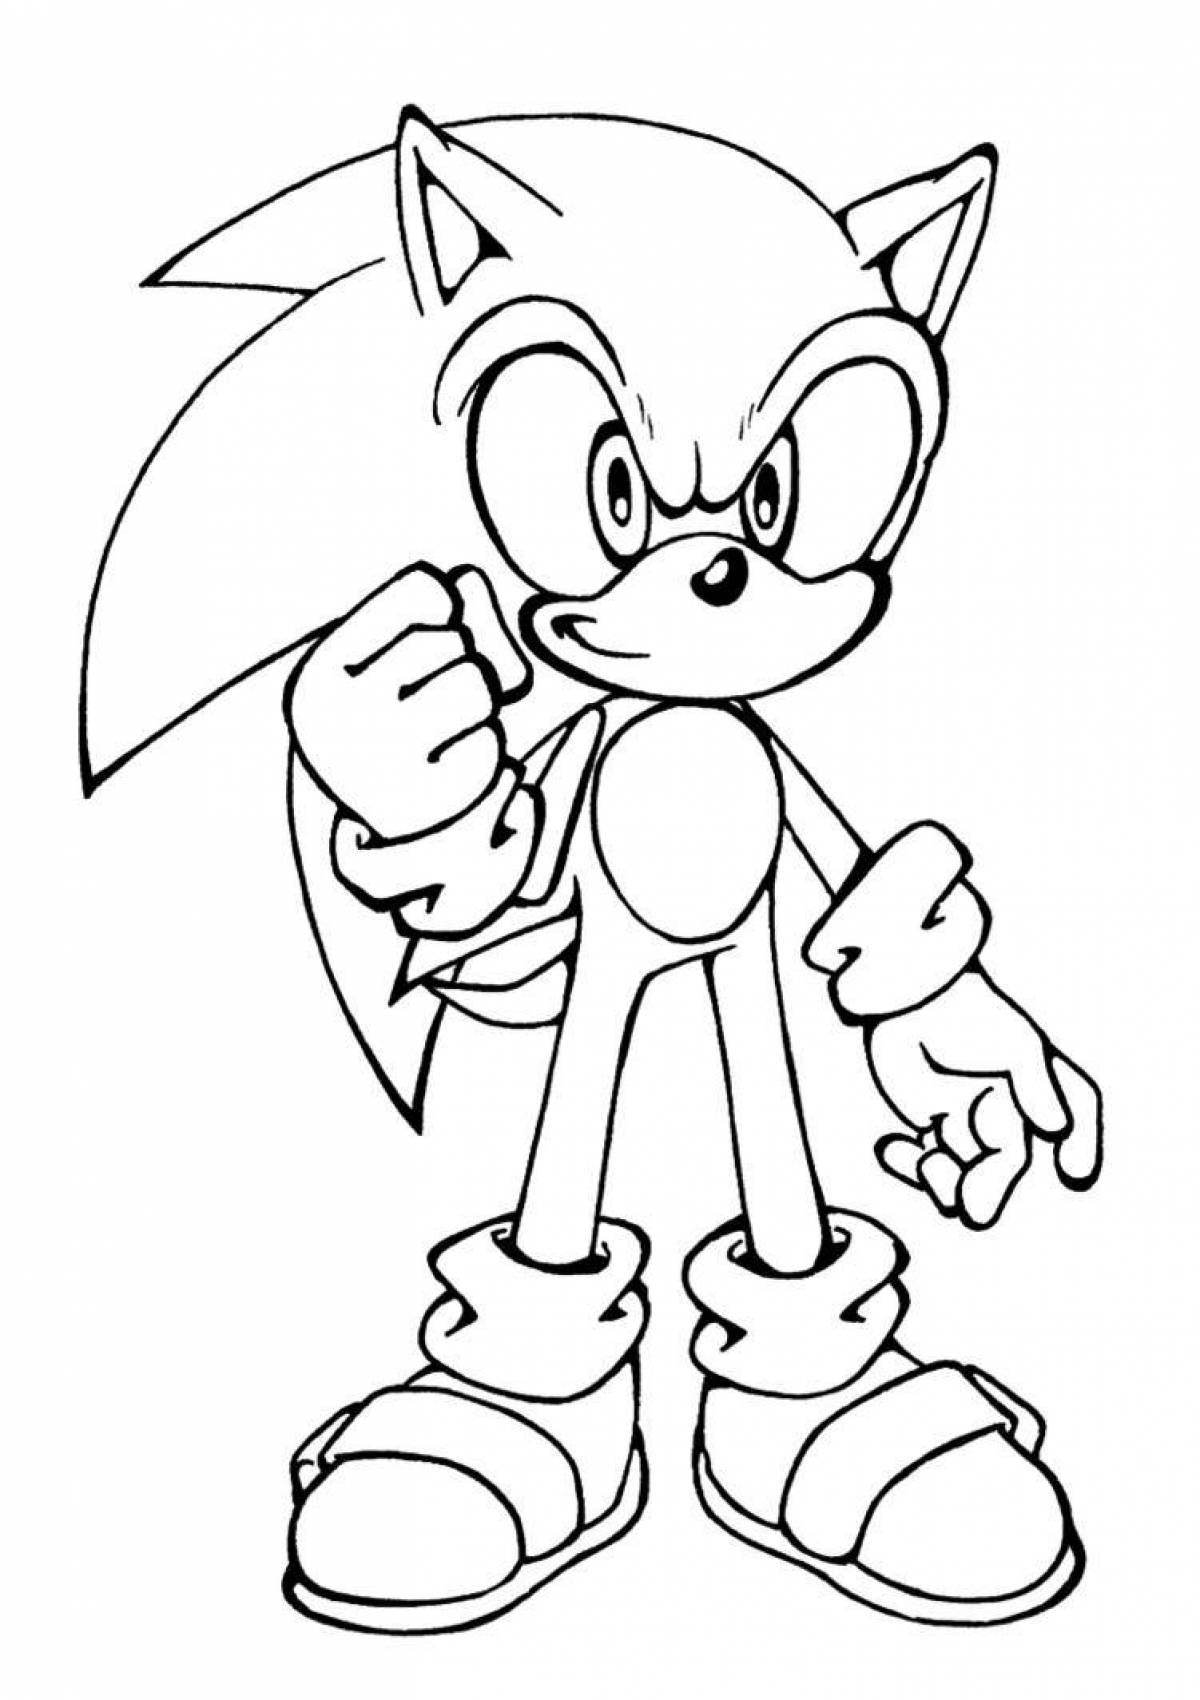 Adorable baby sonic coloring page